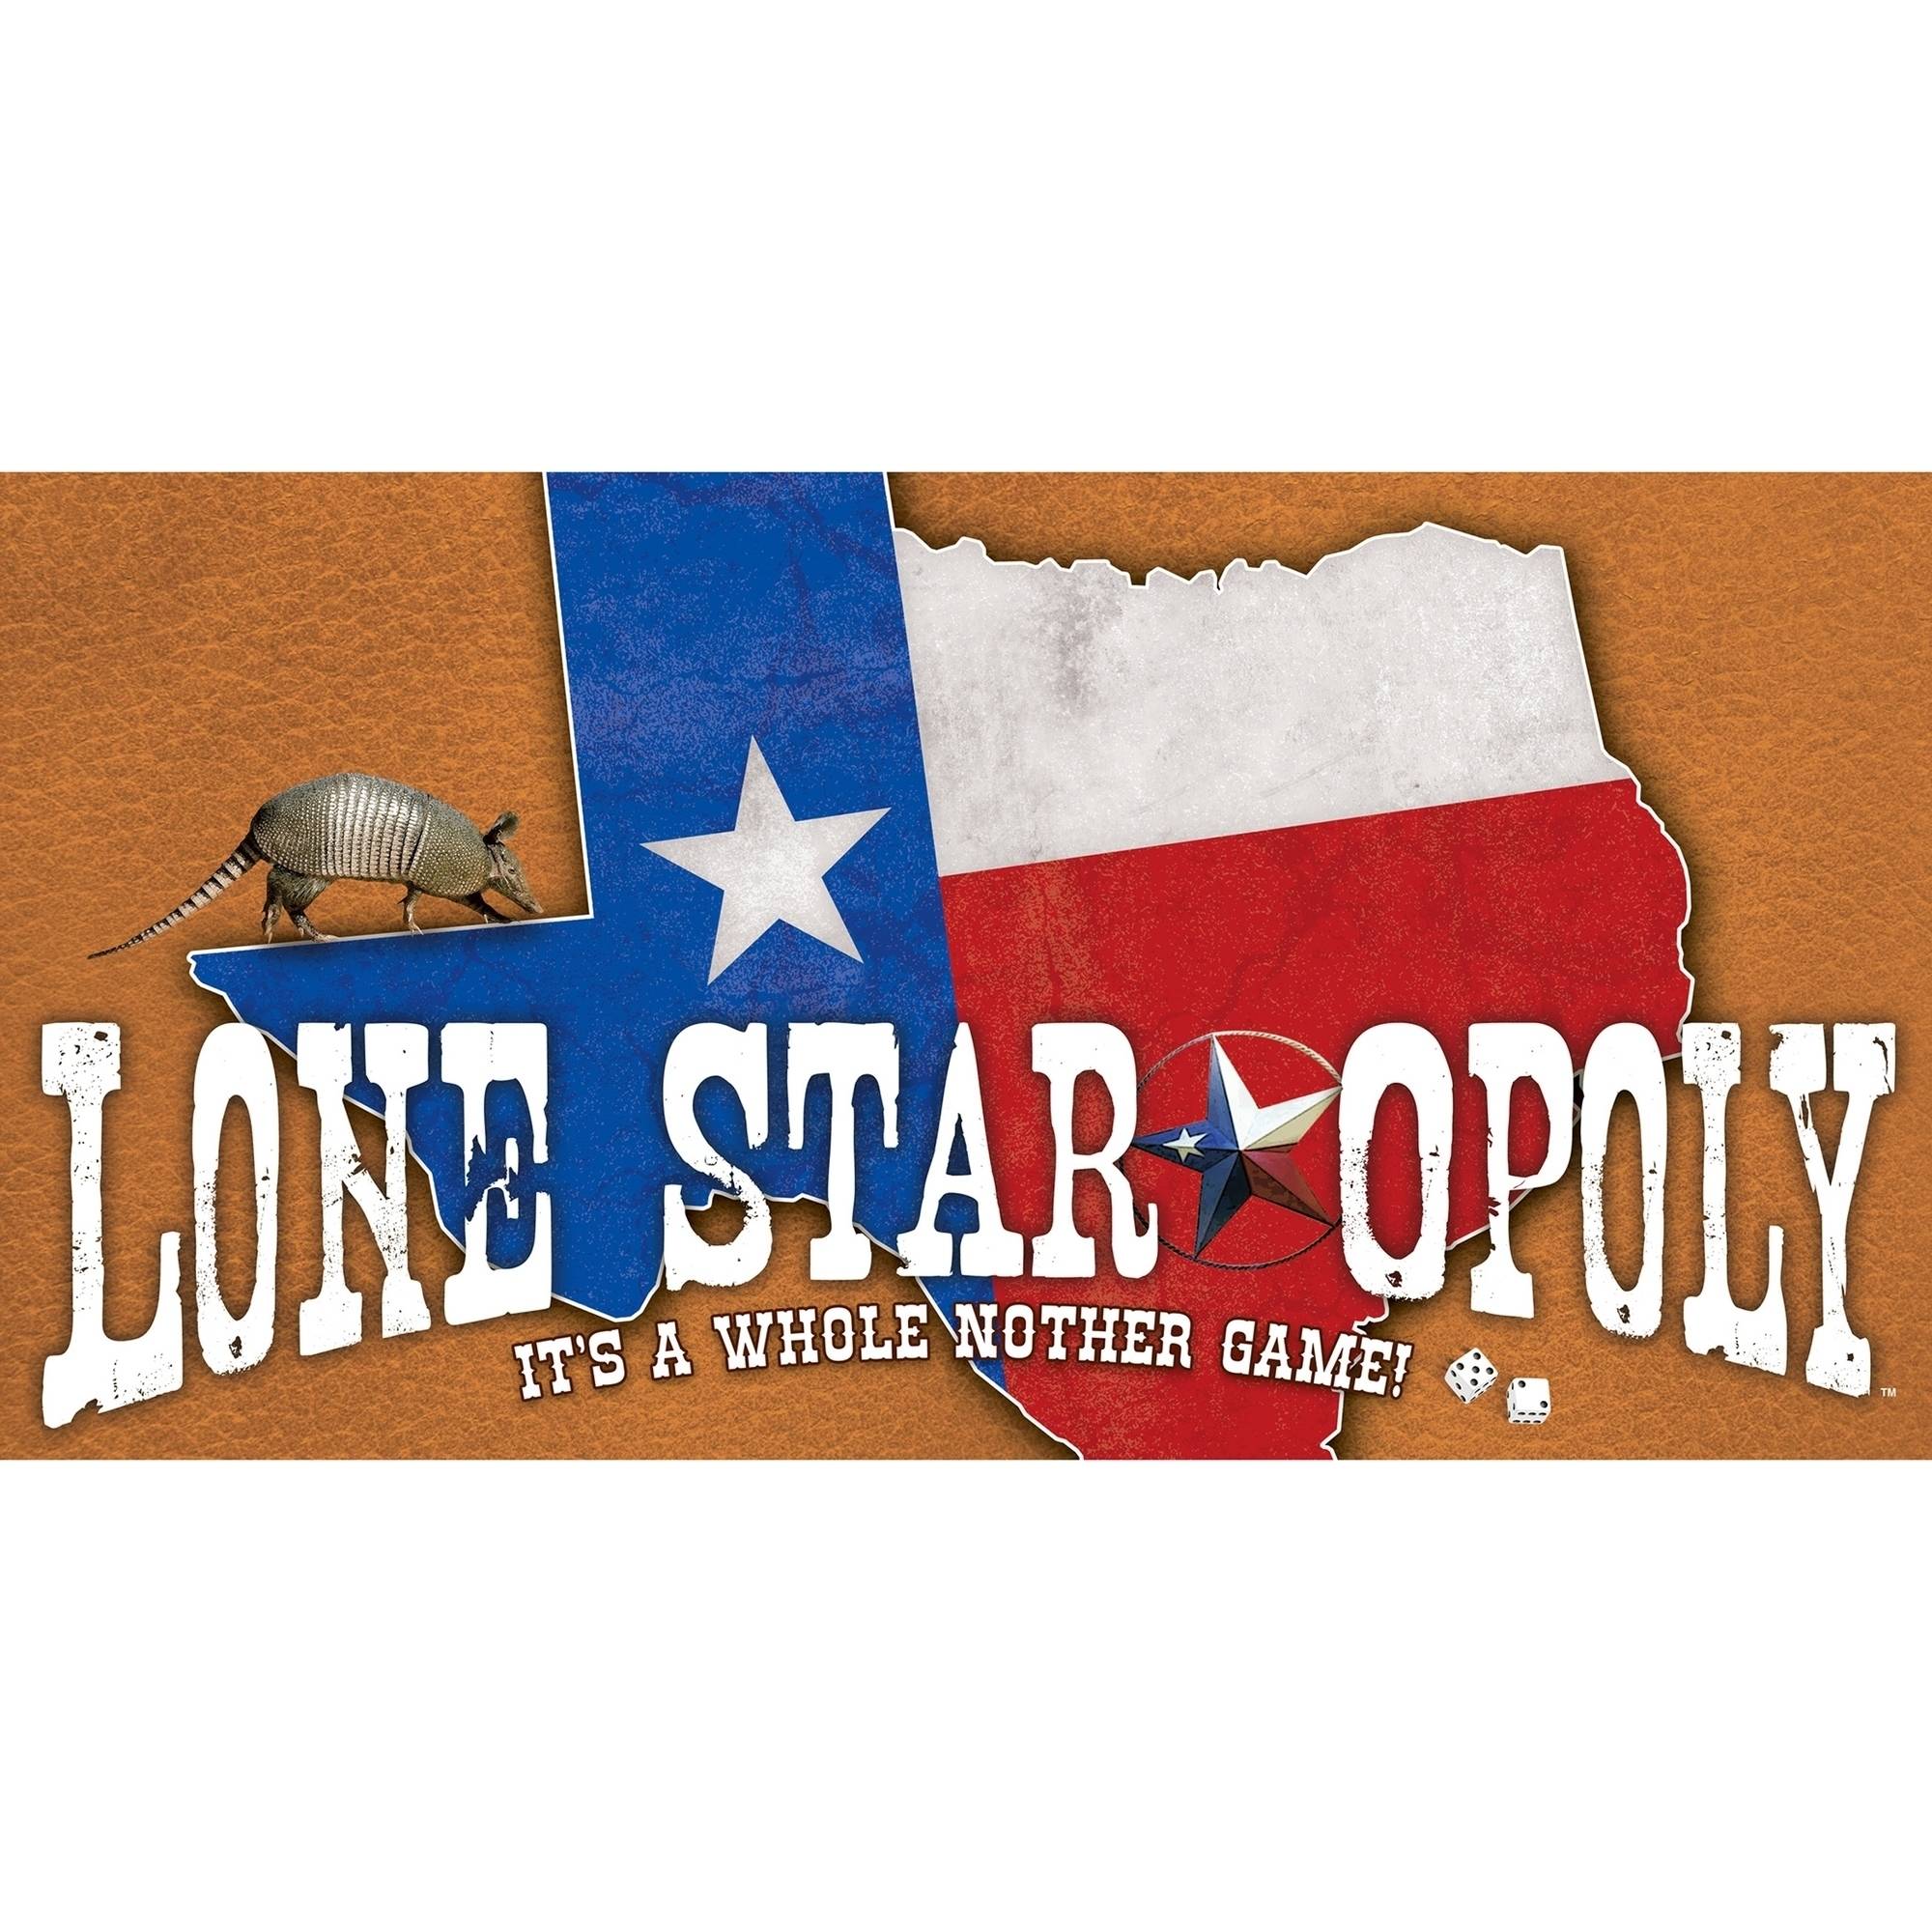 Late for the Sky Lone Star-Opoly - image 2 of 3